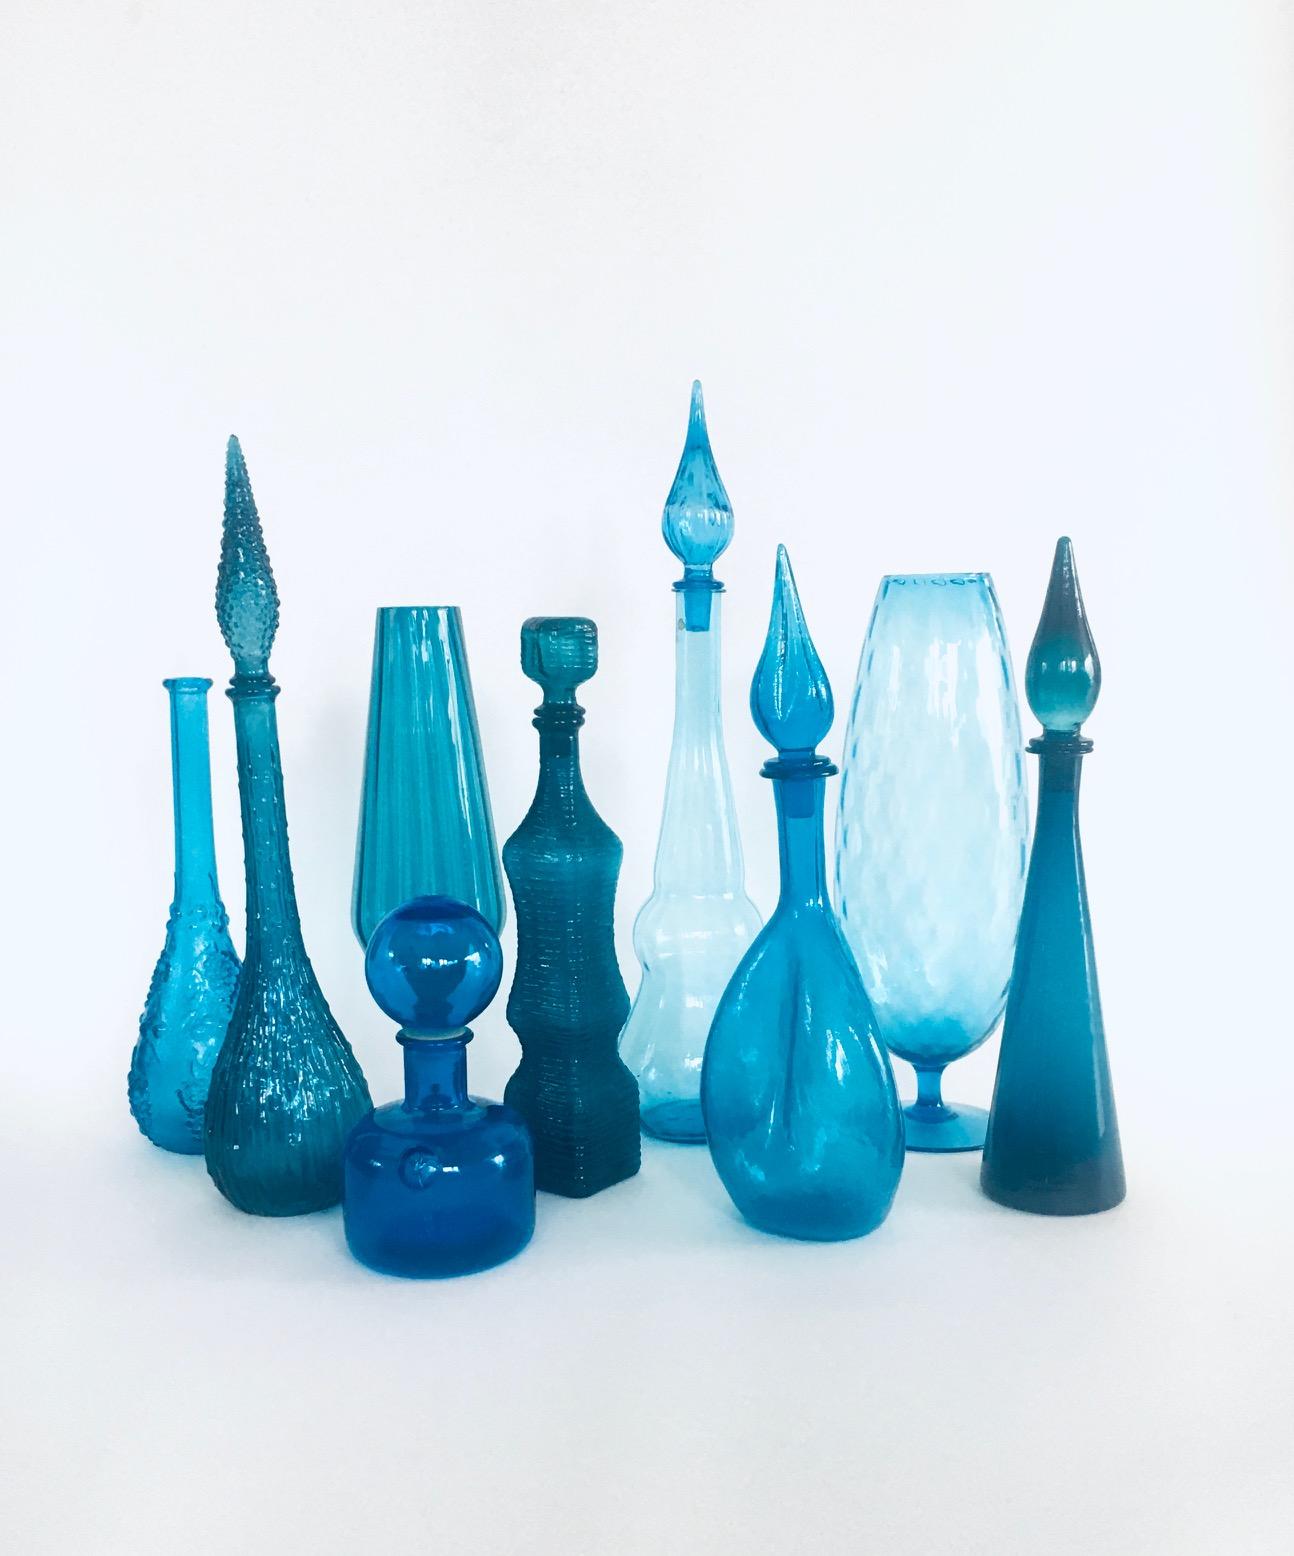 Collection of vintage Blue Glass Vases & Decanters. All are made in the 1960's era. Italy, France, Scandinavia made. Empoli and other design glass. Set of 9 different pieces. All are in blue glass different tones, shapes and models. from 23cm to